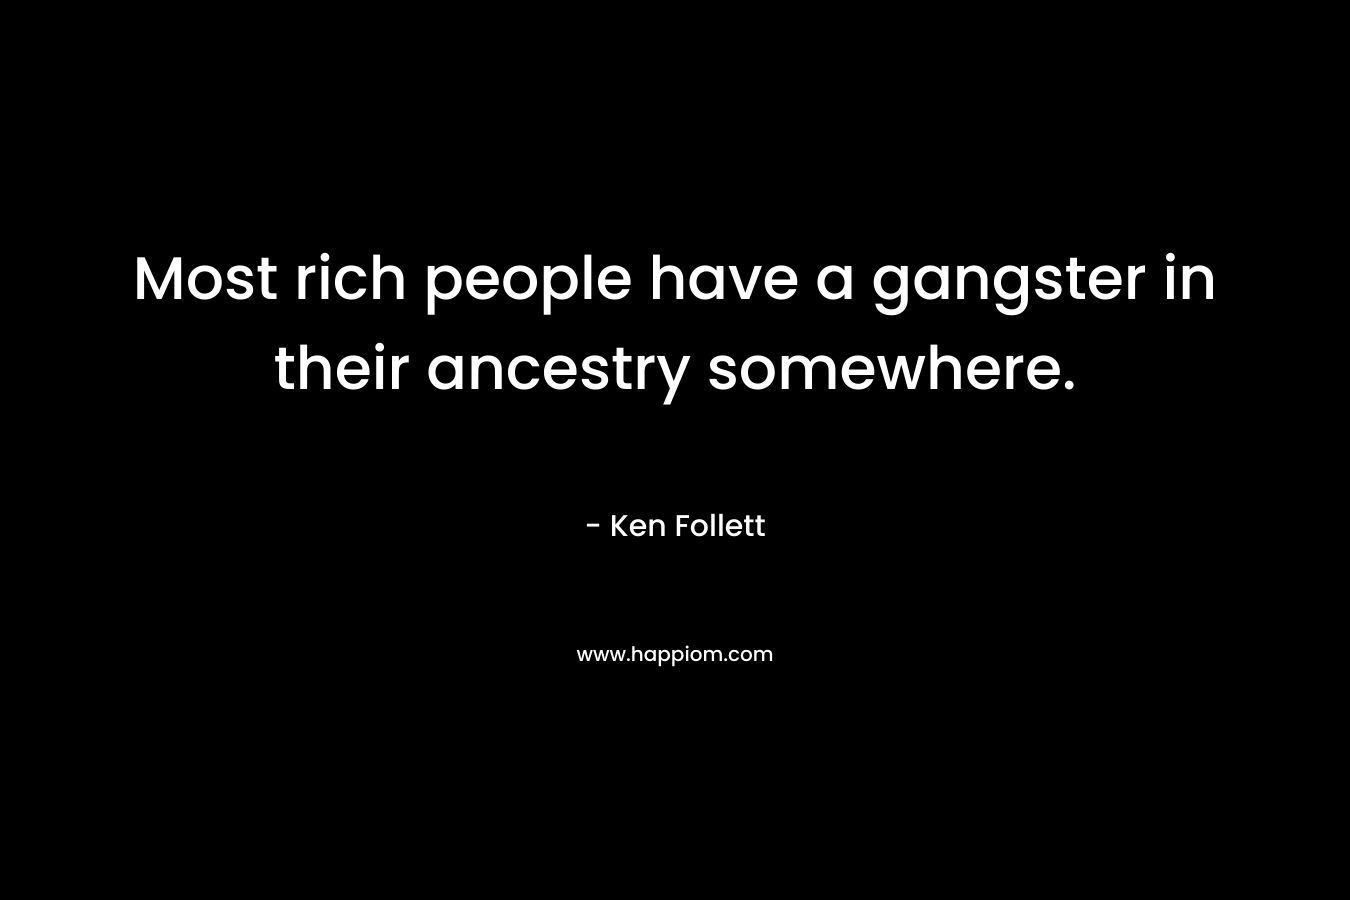 Most rich people have a gangster in their ancestry somewhere. – Ken Follett